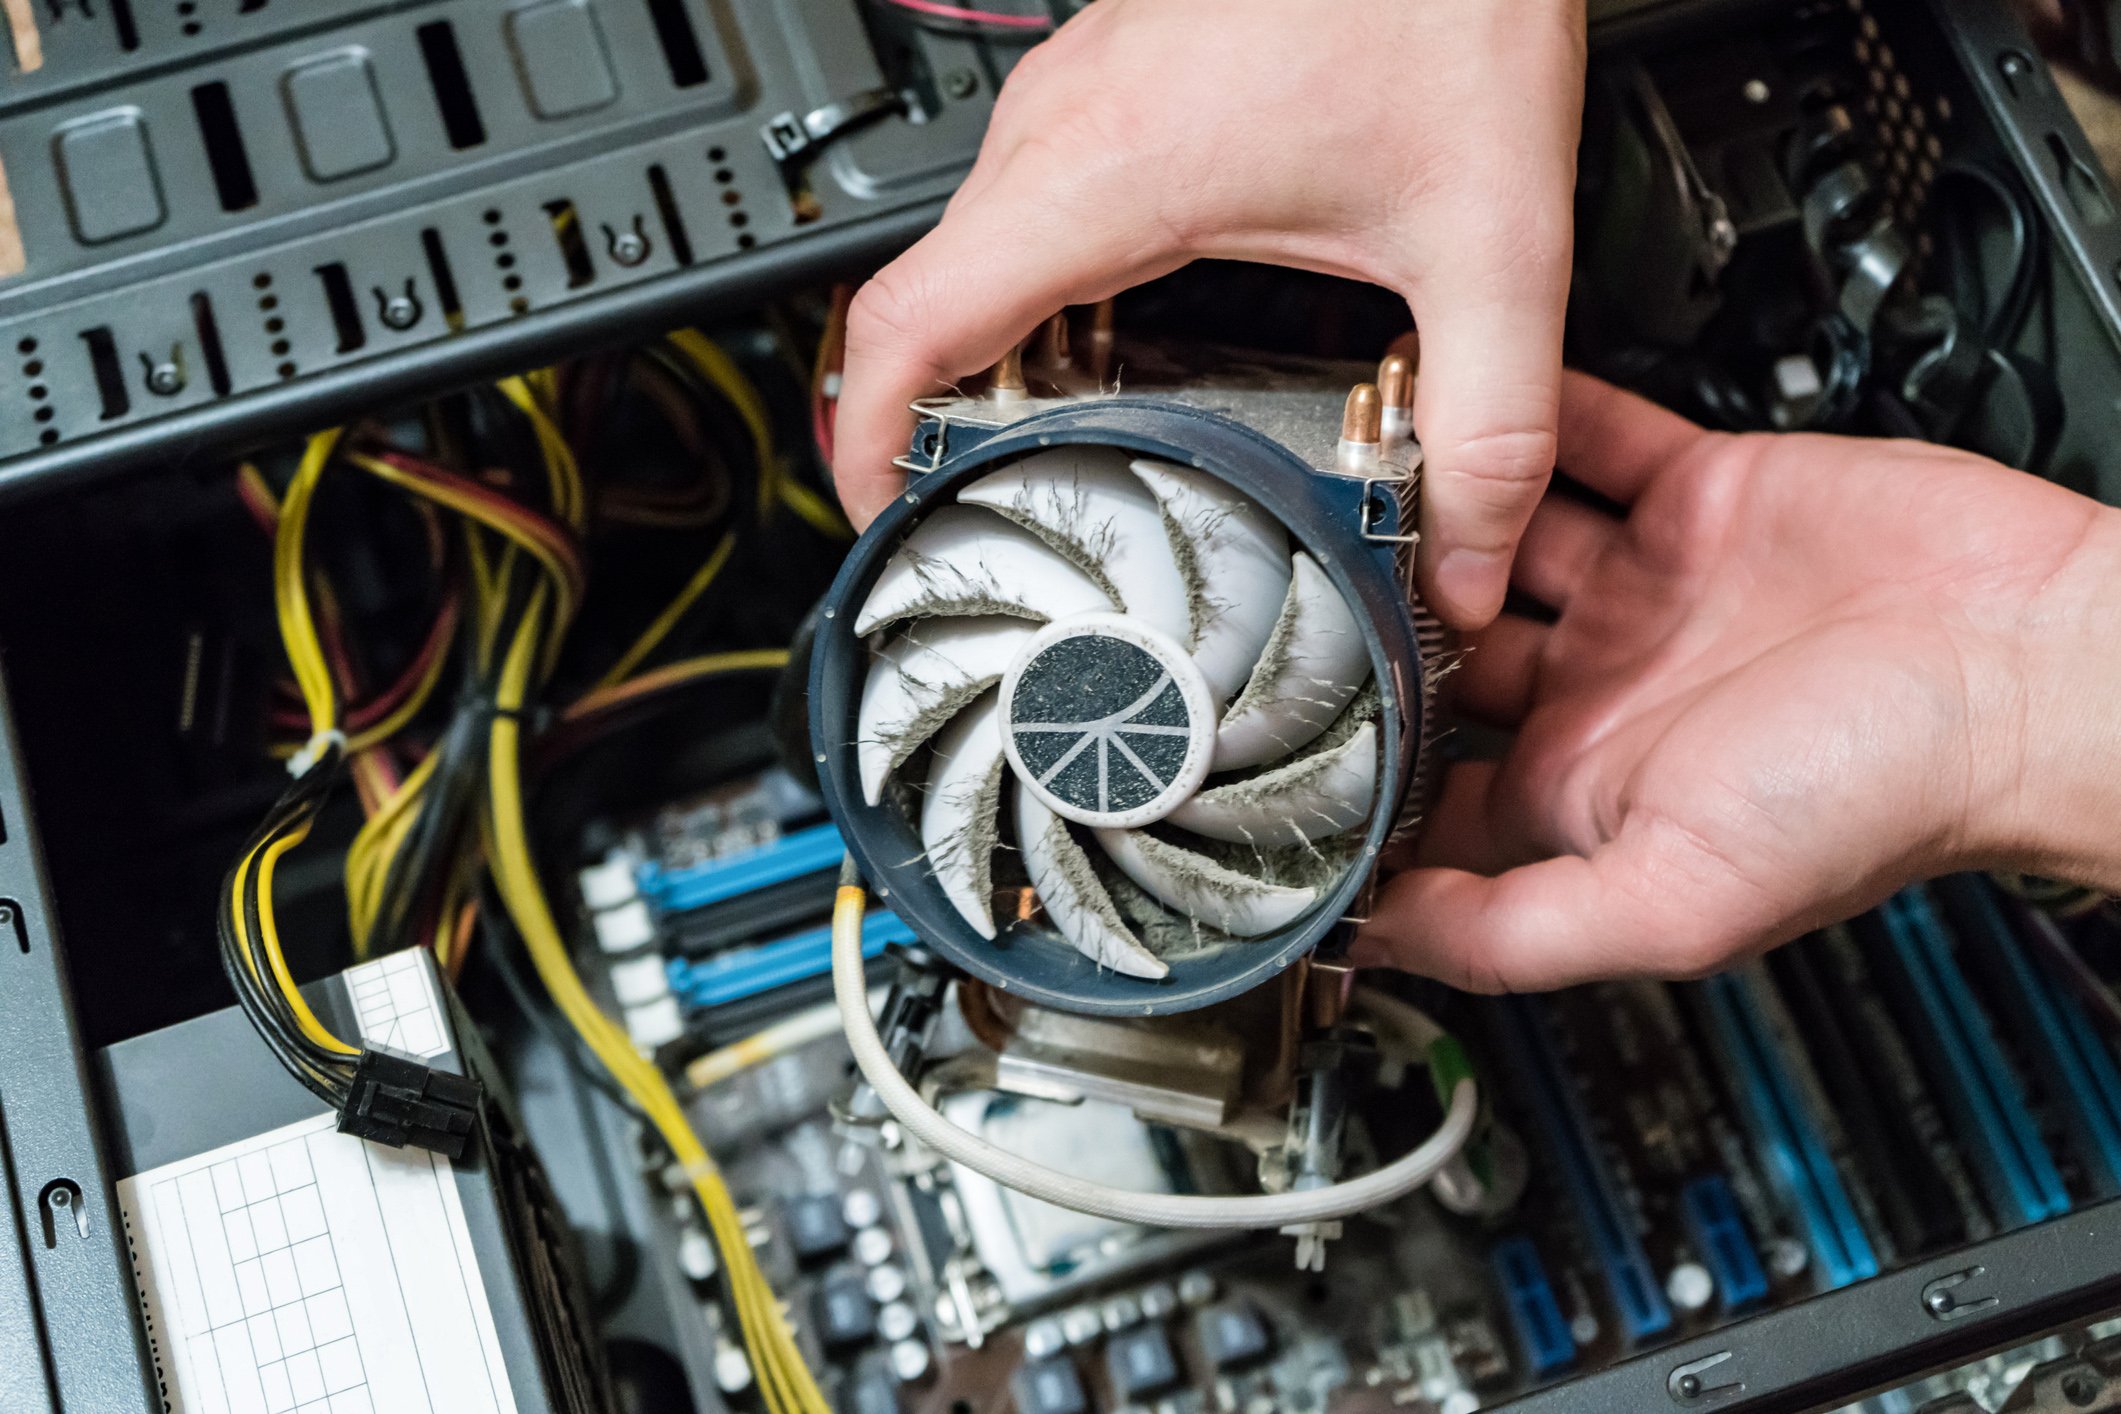 If your computer fan looks grimy like this, it might be time for a more thorough clean to keep it running smoothly. (iStock Photo)